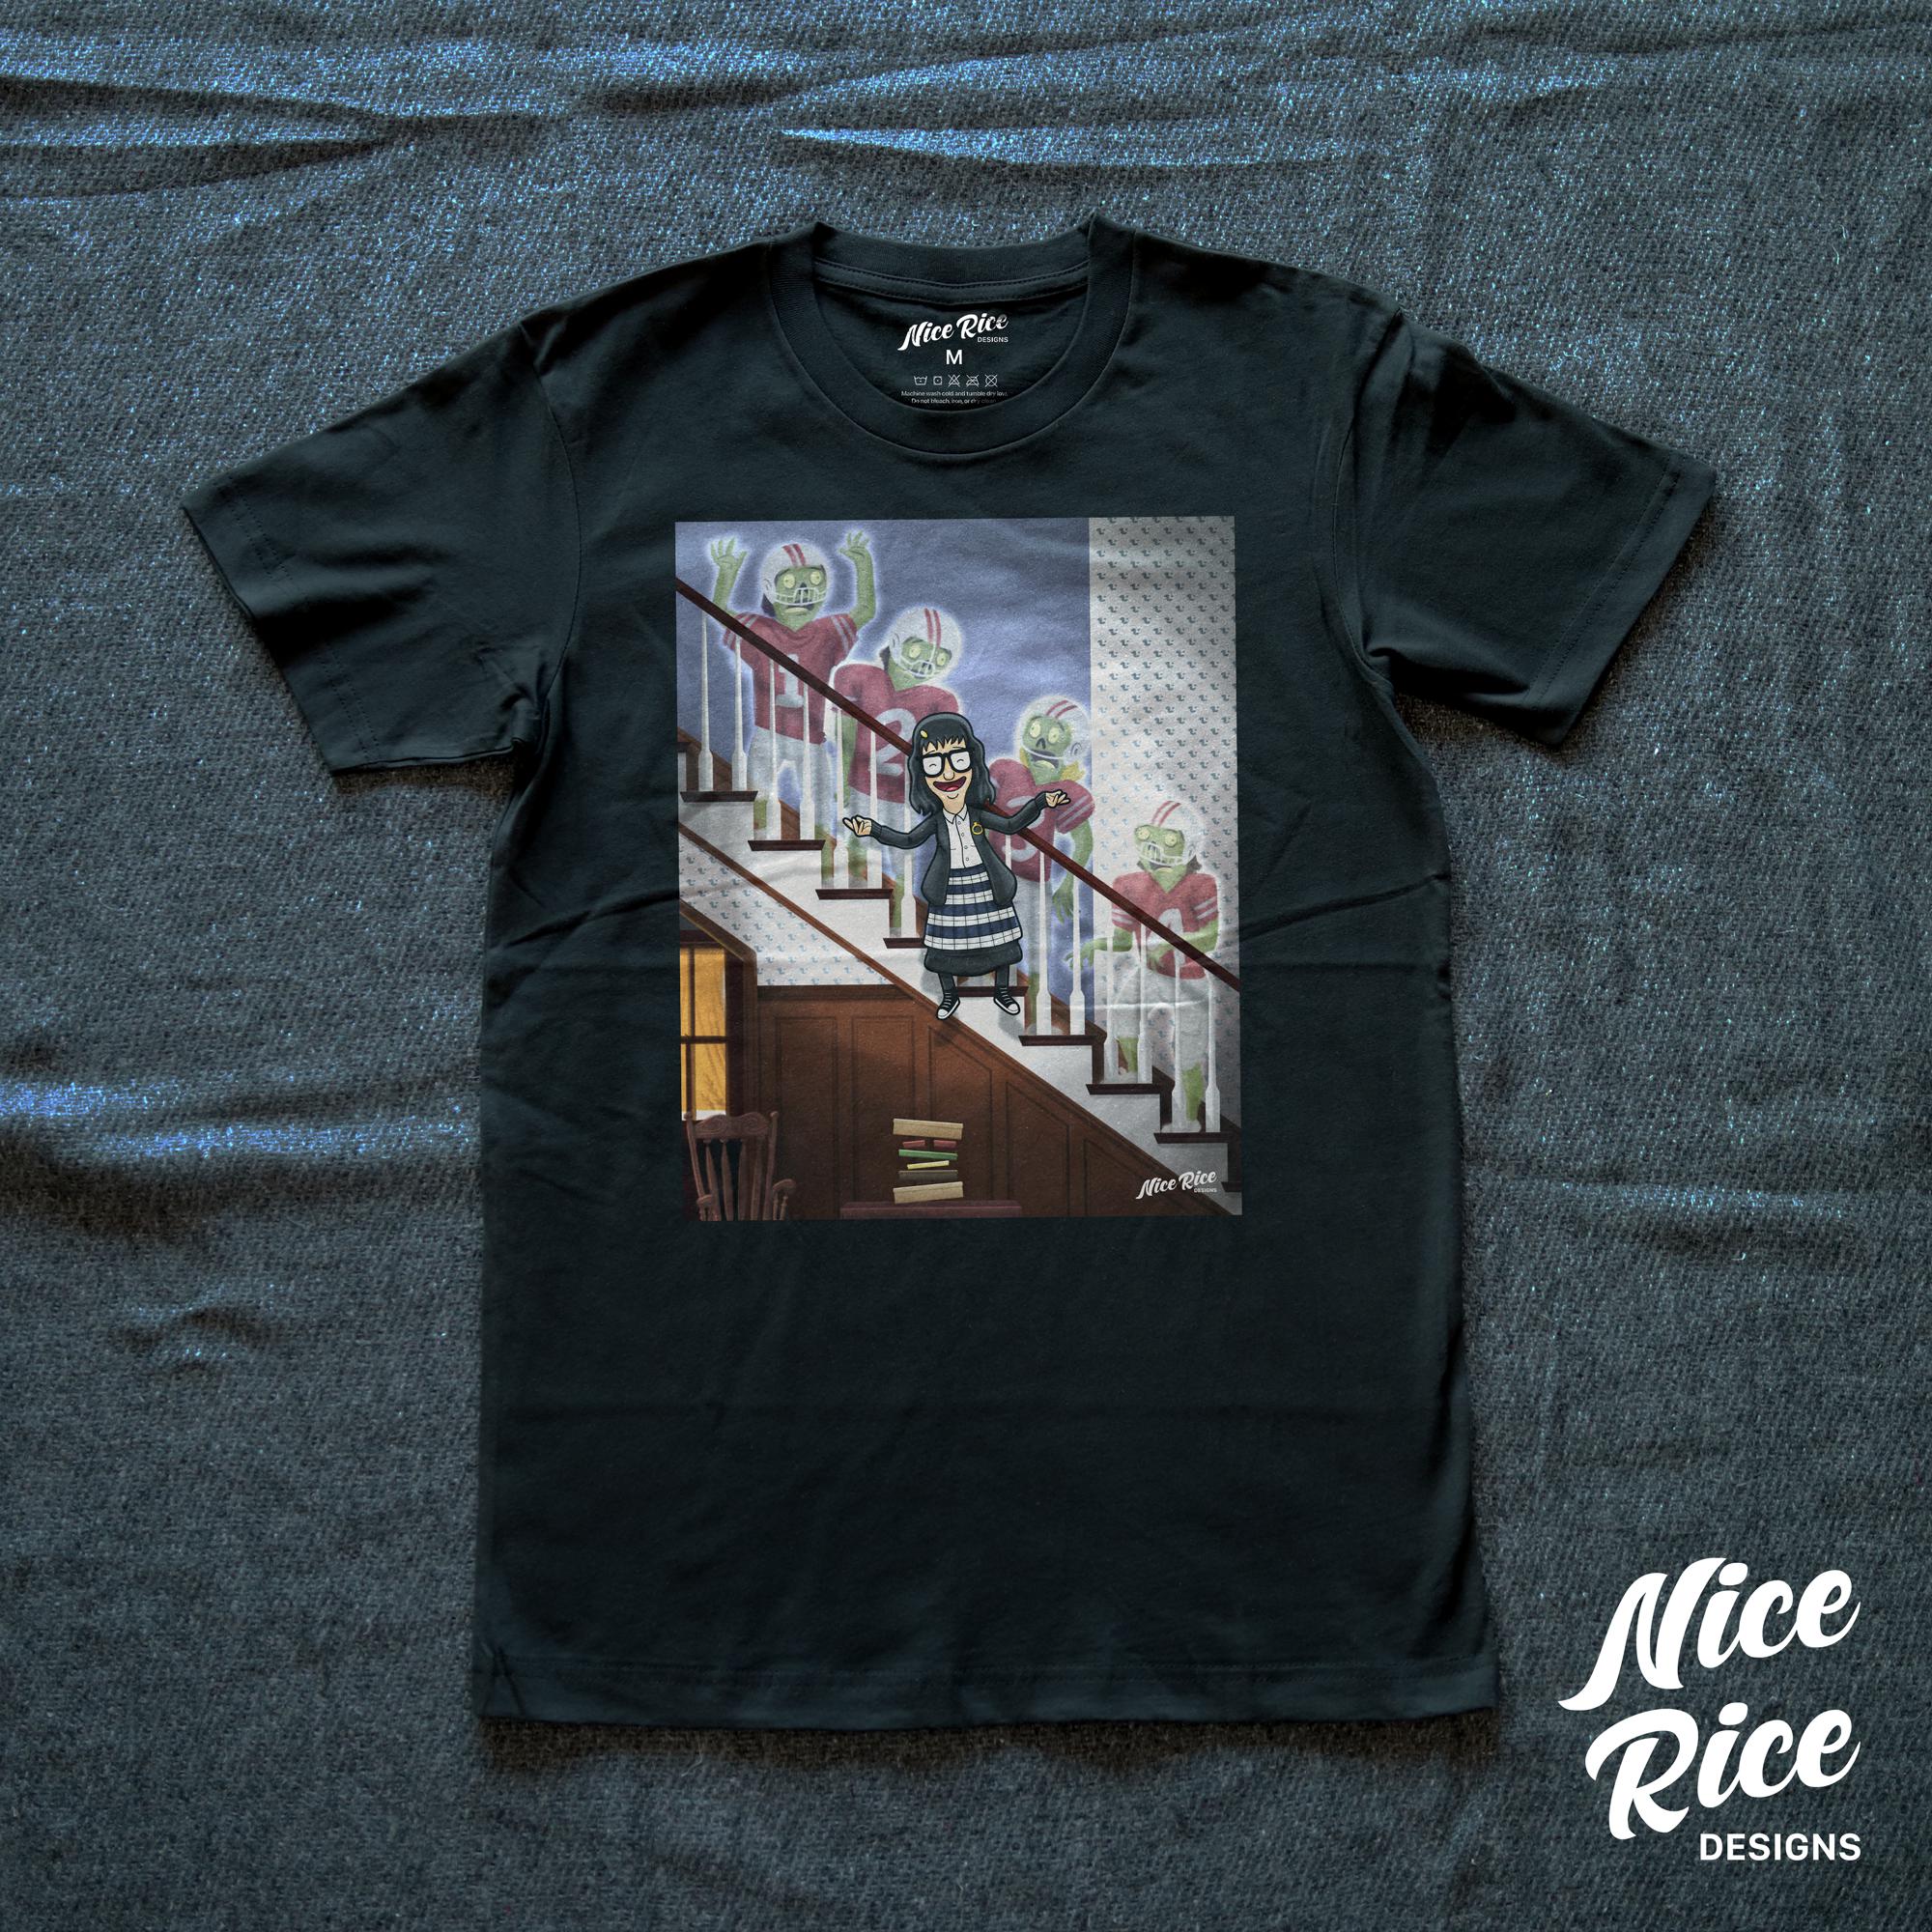 Jump in the Line Shirt by Nice Rice Designs